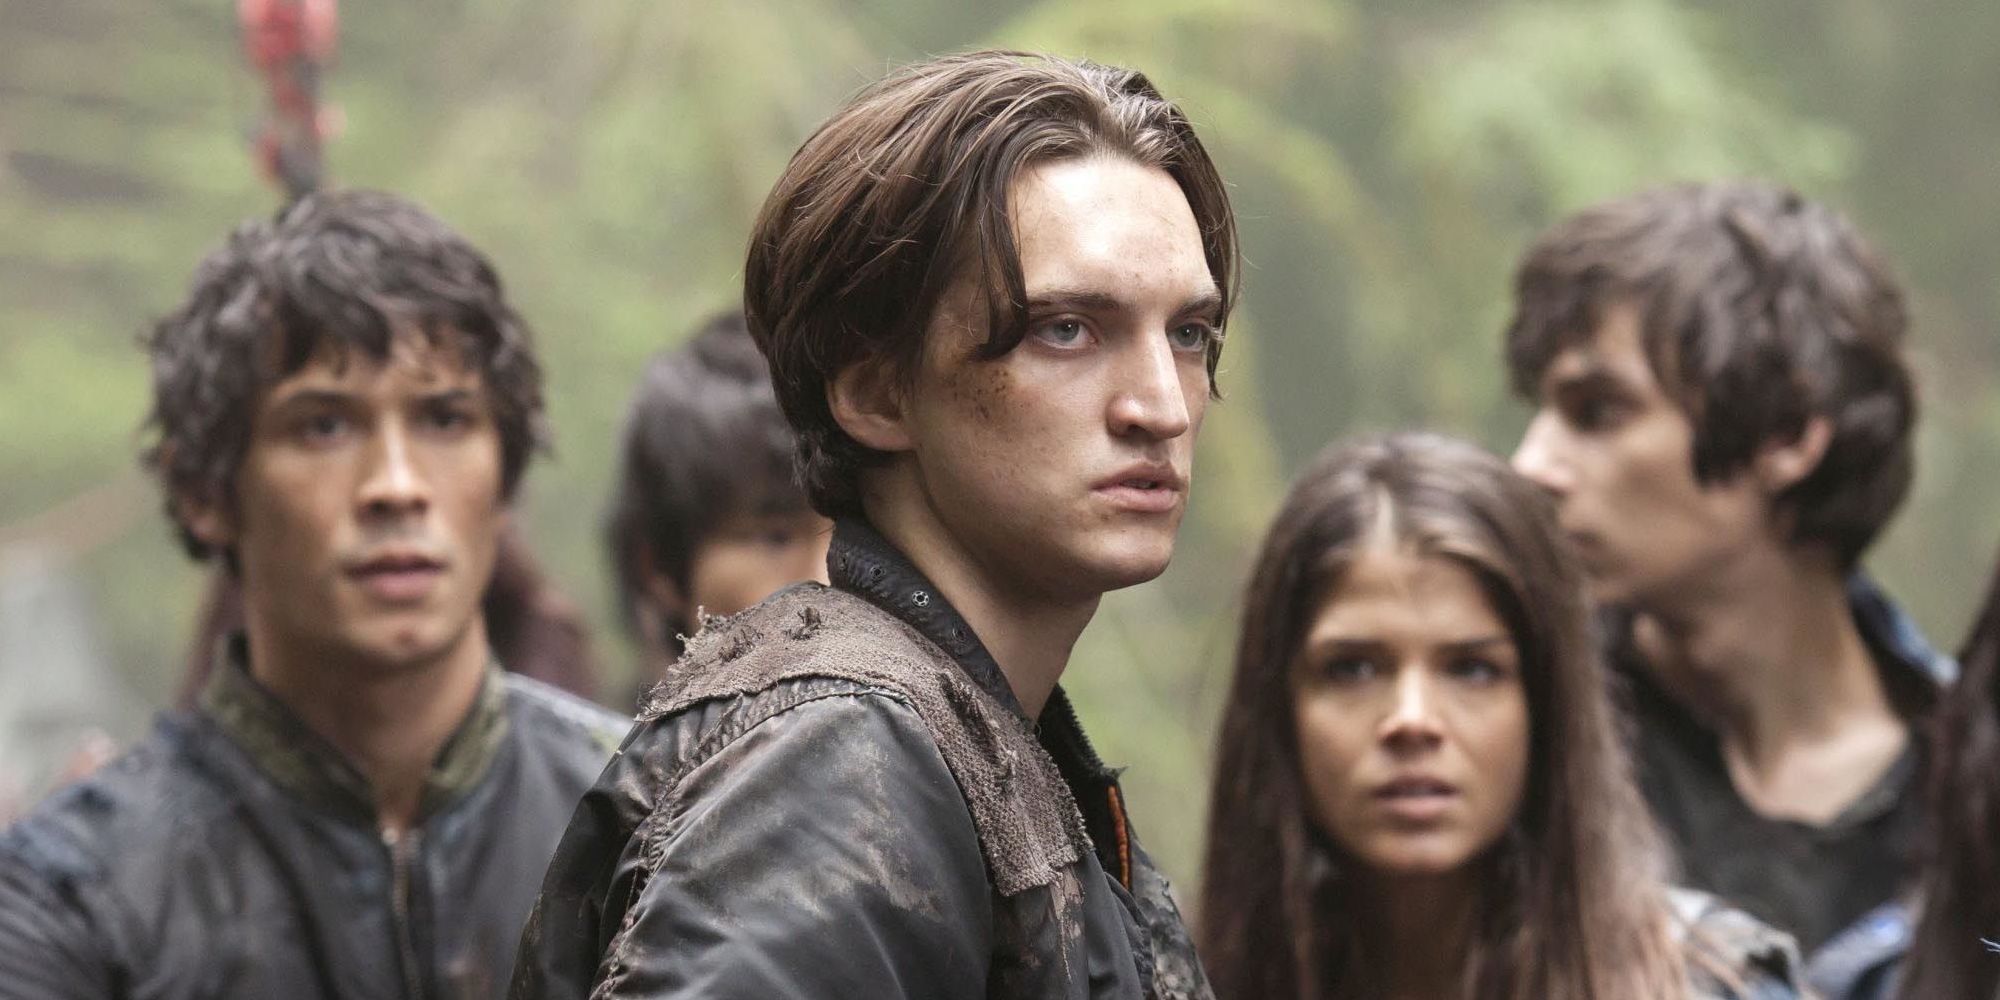 Bellamy and Octavia look on while Murphy is accused in The 100